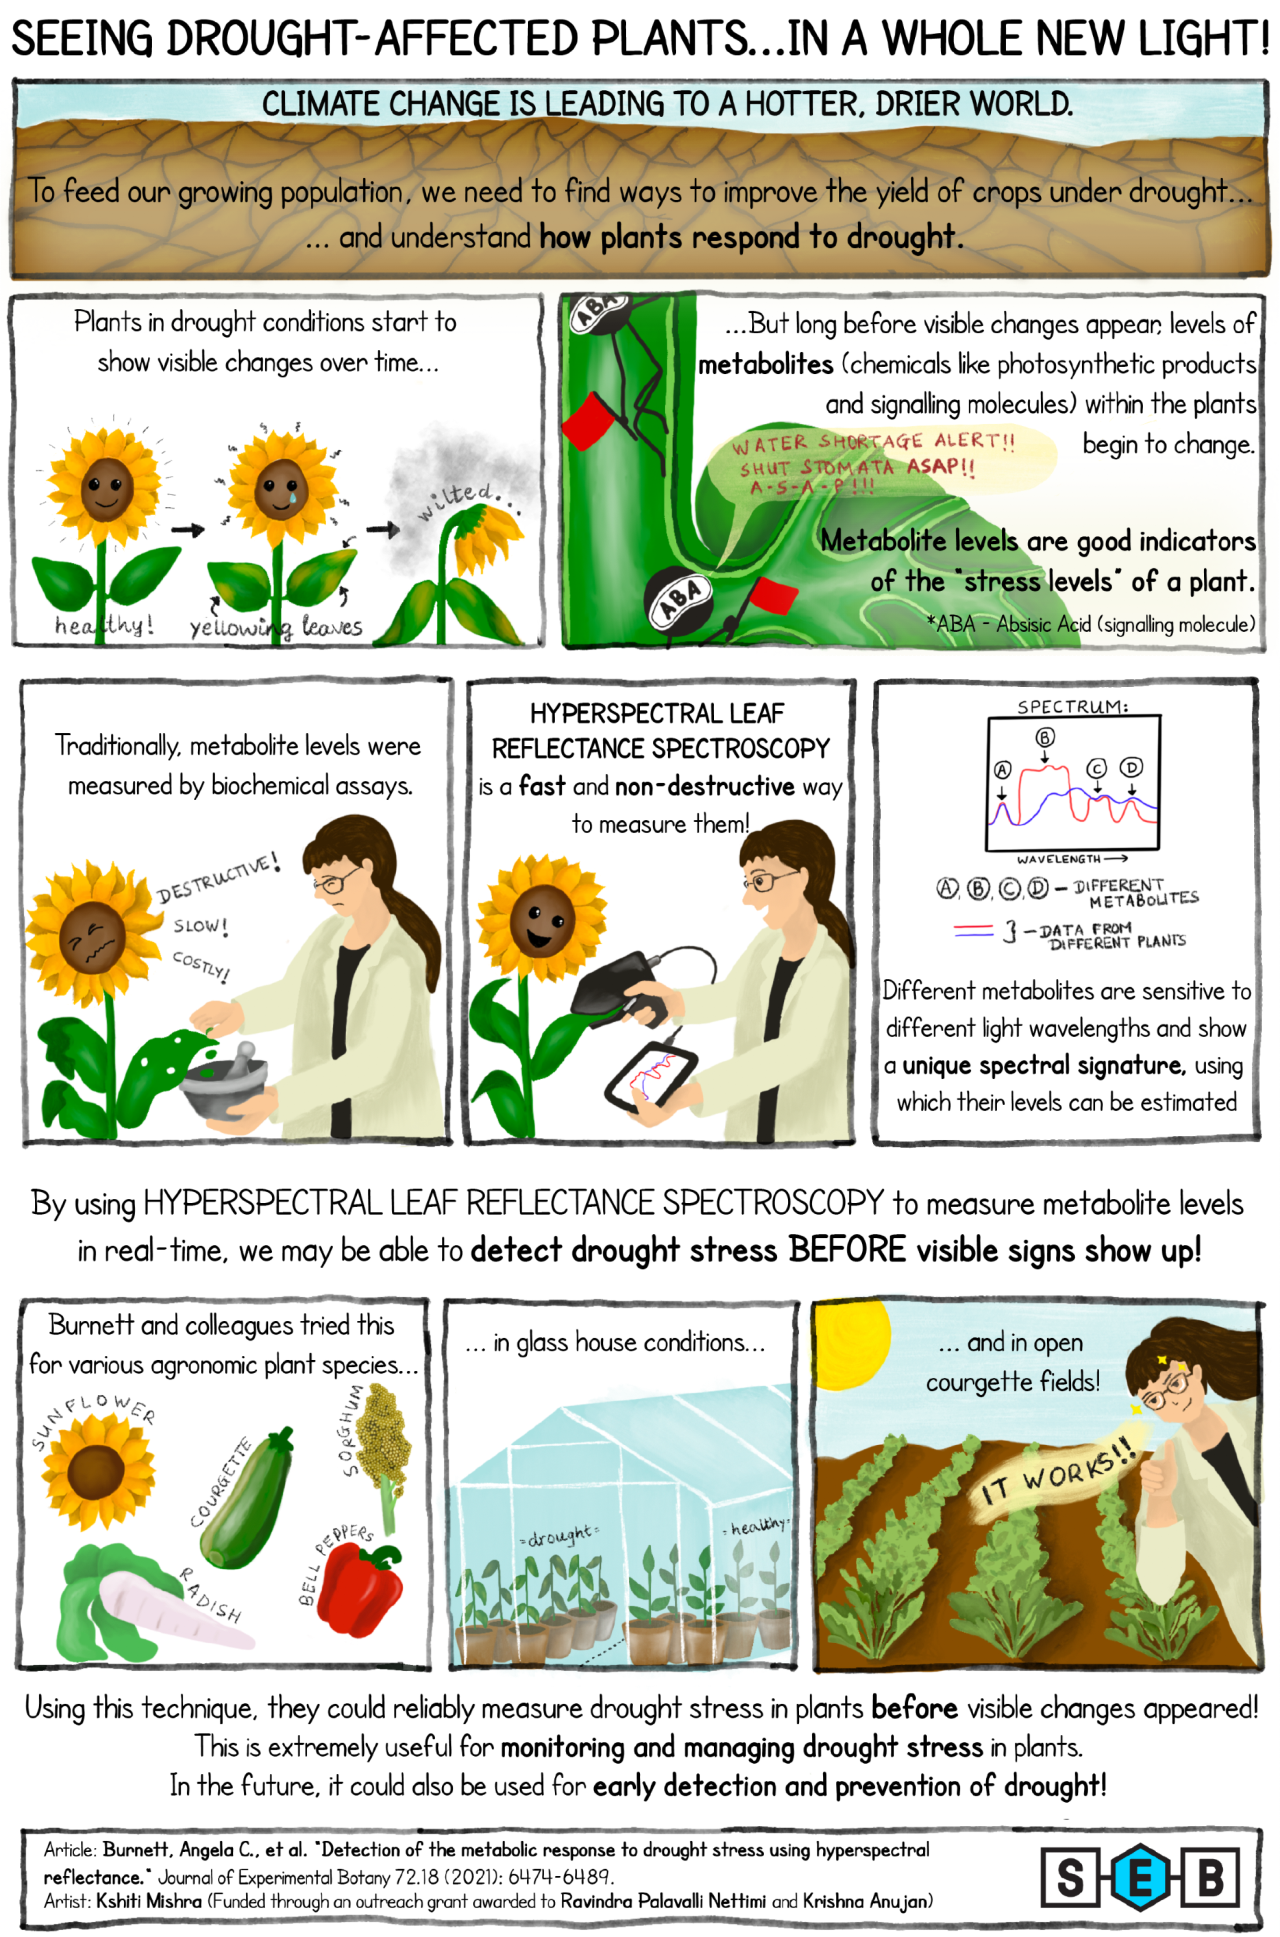 Please check section entitled 'Extended Alt Text of the Poster “Seeing drought-affected plants…in a whole new light!”' for full description on the bottom of this page.